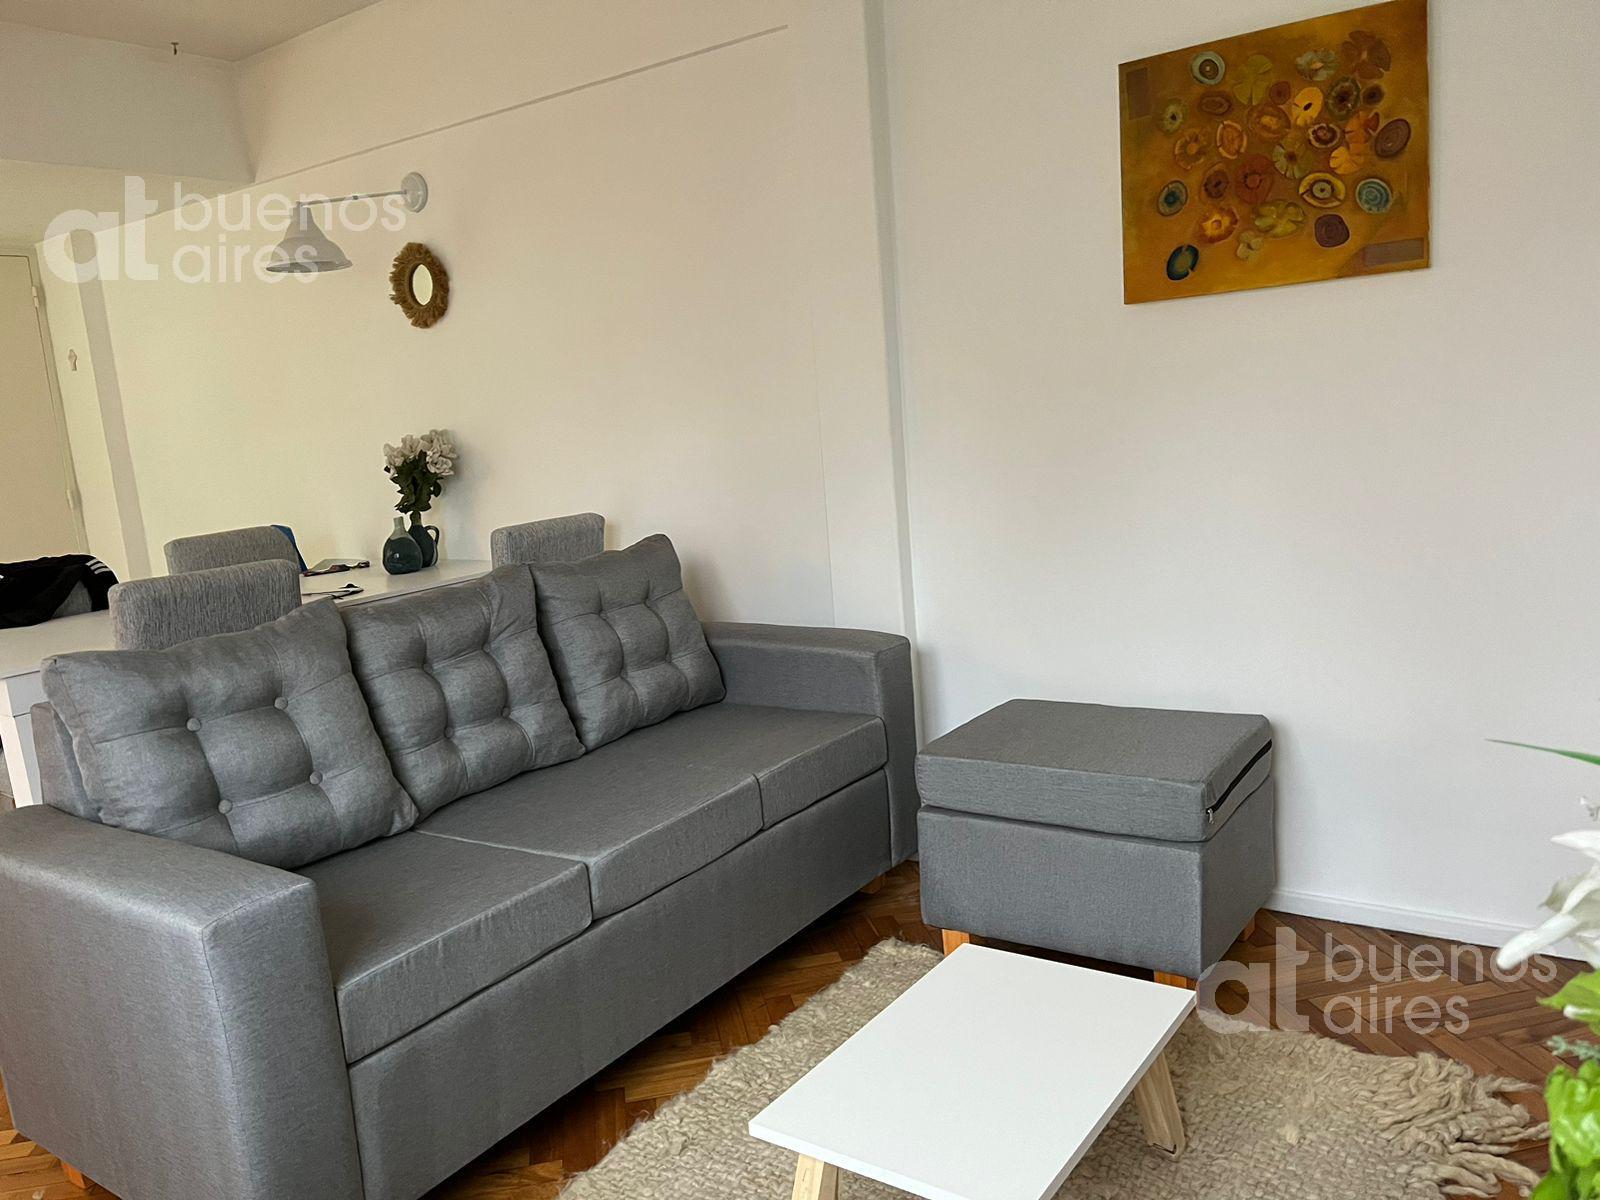 #5179377 | Temporary Rental | Apartment | Palermo (At Buenos Aires)